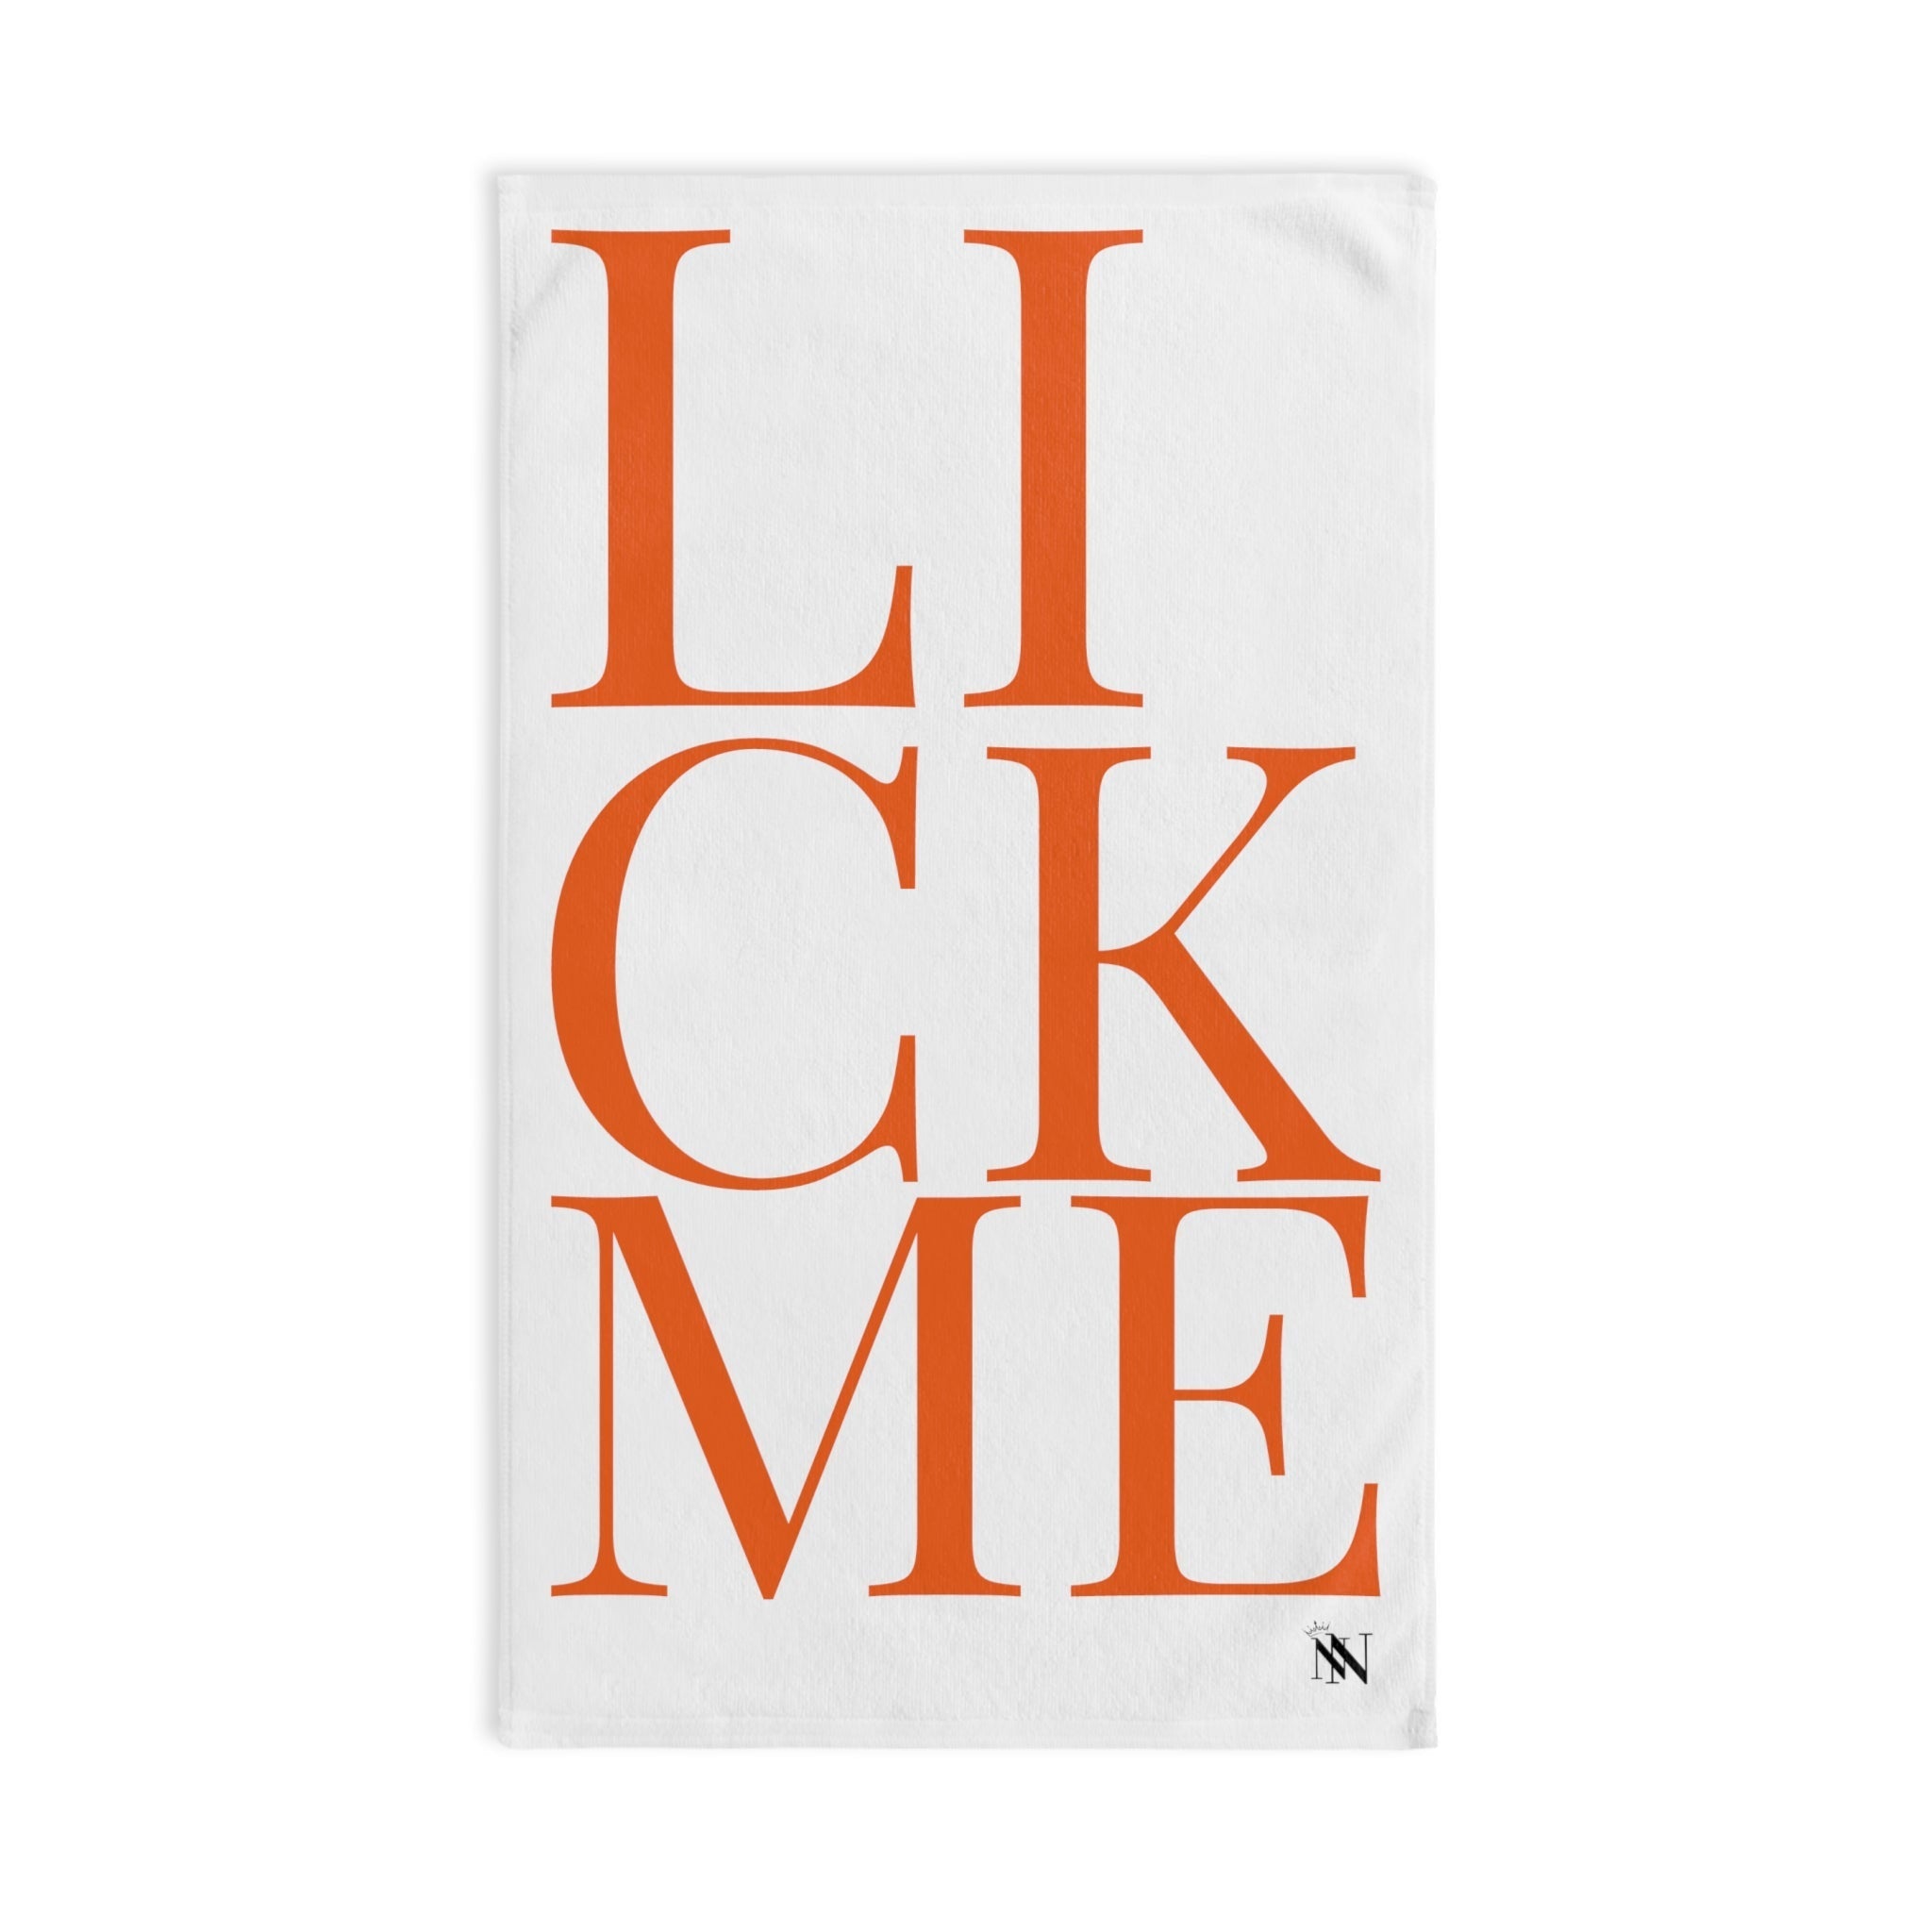 Lick Me Orange White | Funny Gifts for Men - Gifts for Him - Birthday Gifts for Men, Him, Her, Husband, Boyfriend, Girlfriend, New Couple Gifts, Fathers & Valentines Day Gifts, Christmas Gifts NECTAR NAPKINS